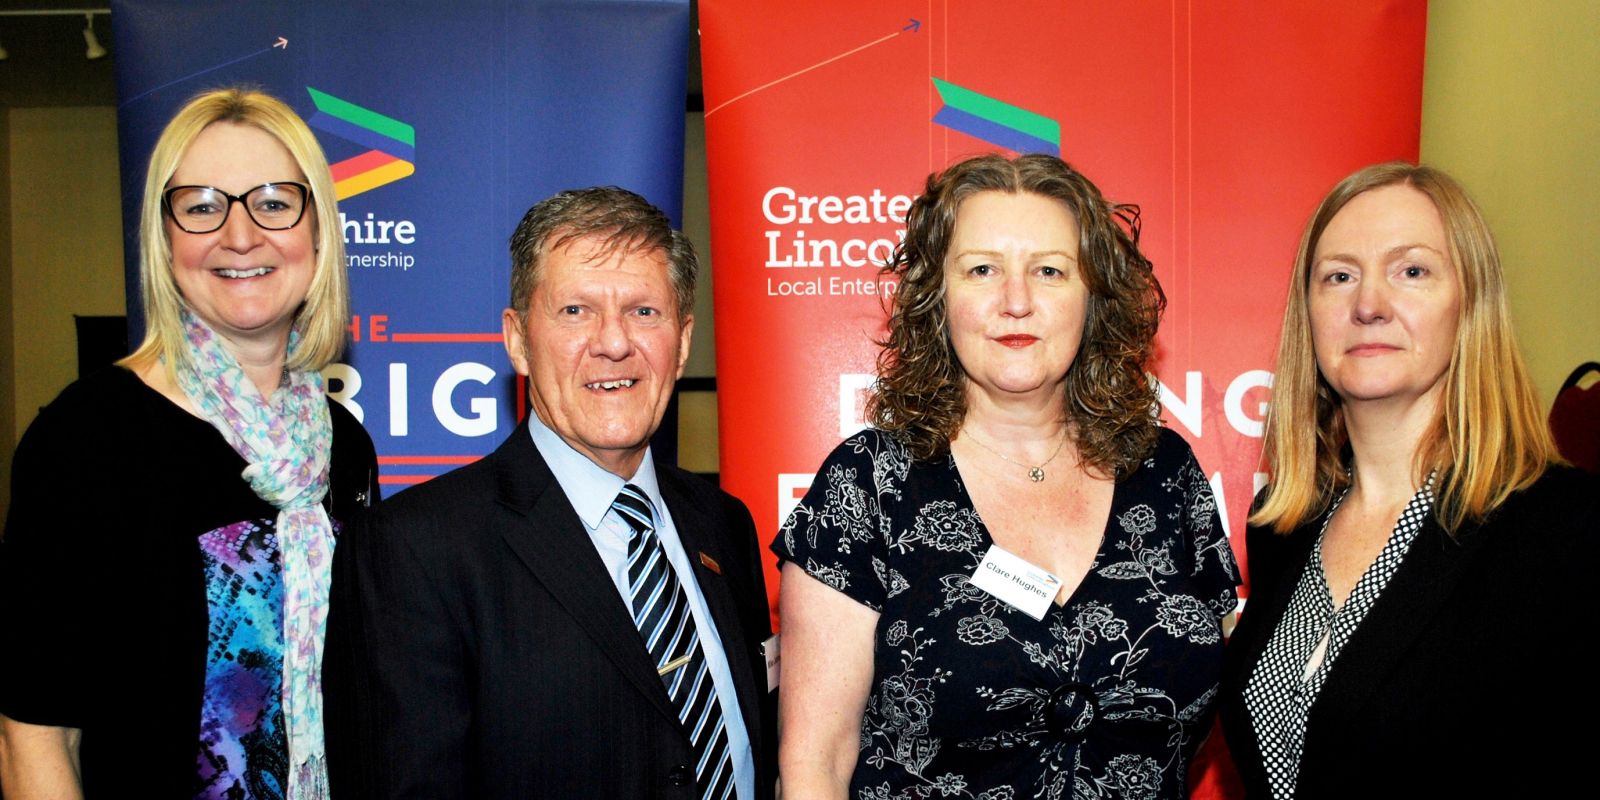 Left to right: Amanda Bouttell, a member of the LEP team; Mike Johnson MBE, apprenticeship ambassador; Clare Hughes, LEP skills lead; and Ru